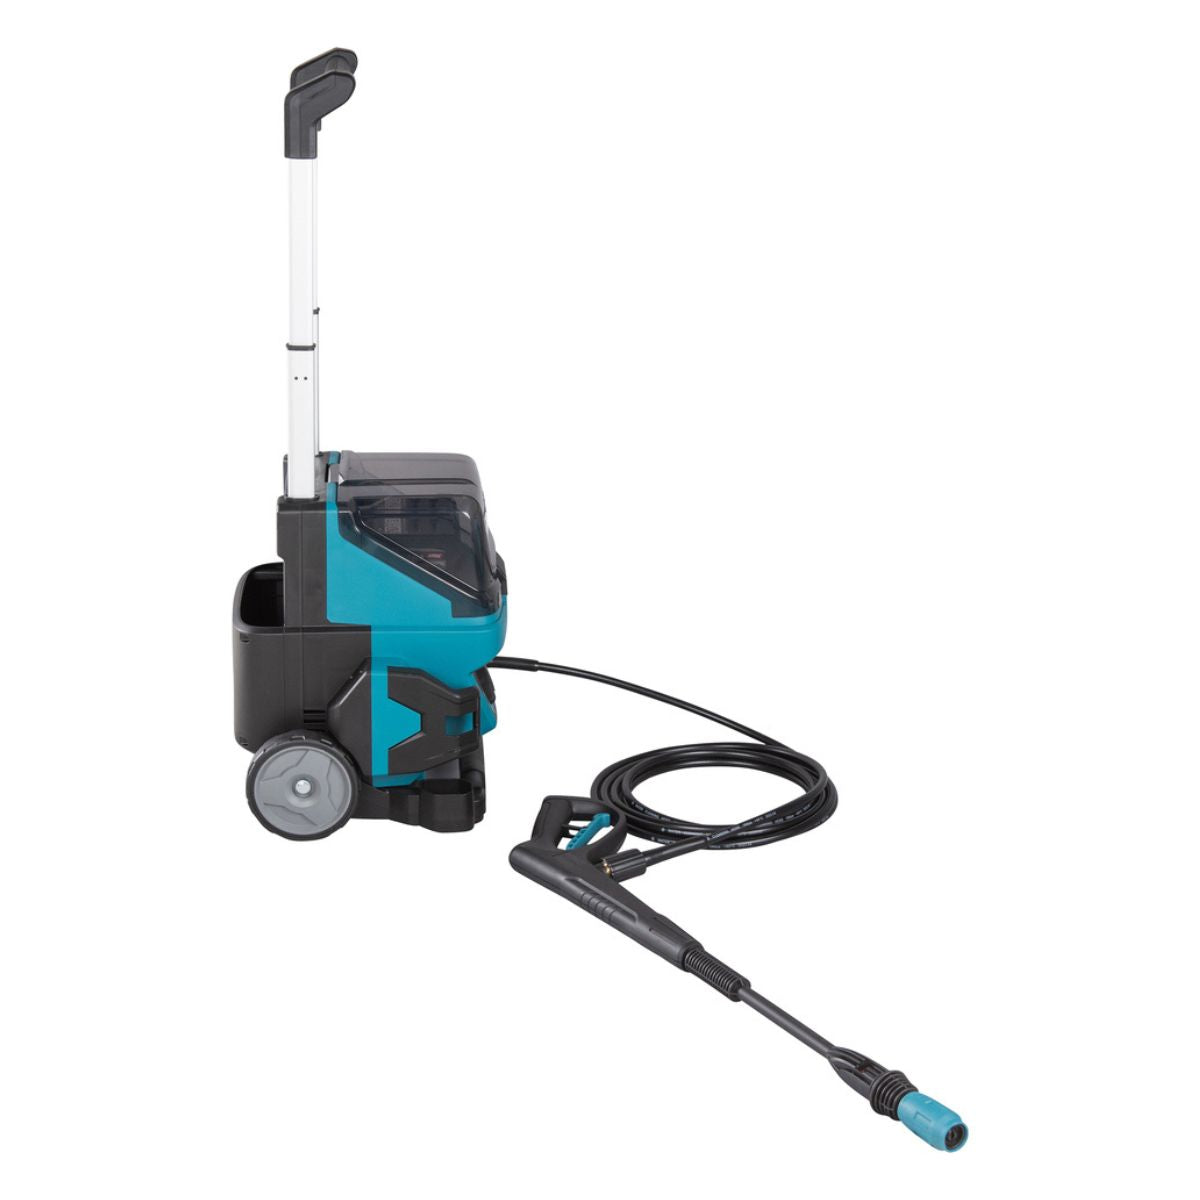 Makita HW001GT201 40V Max Brushless Pressure Washer With 2 x 5.0Ah Batteries & Charger